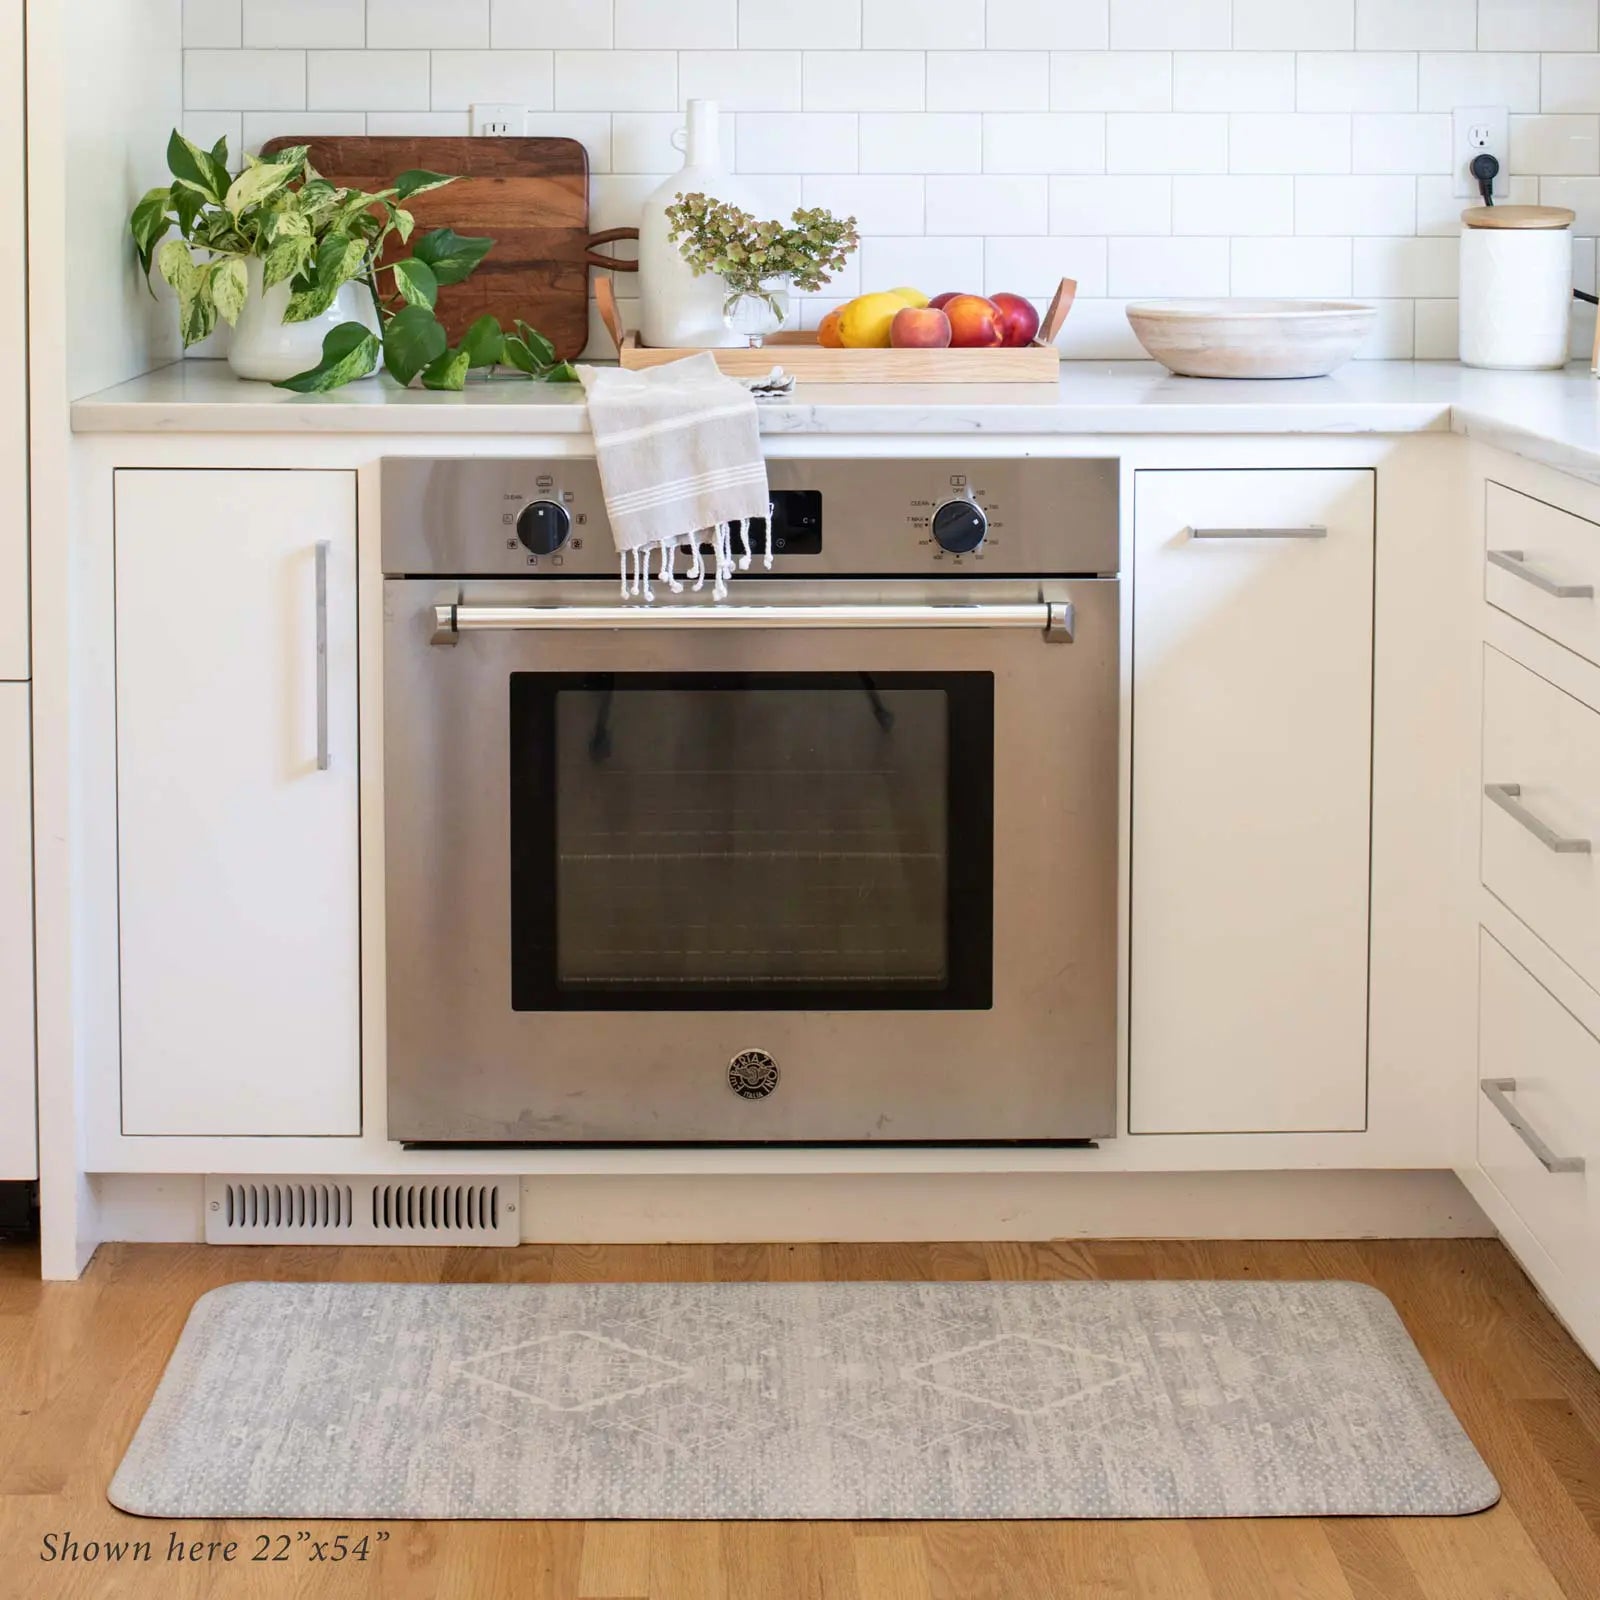 Ula gray and white Minimal Boho Pattern Standing Mat shown in kitchen in front of oven, shown in size 22x54